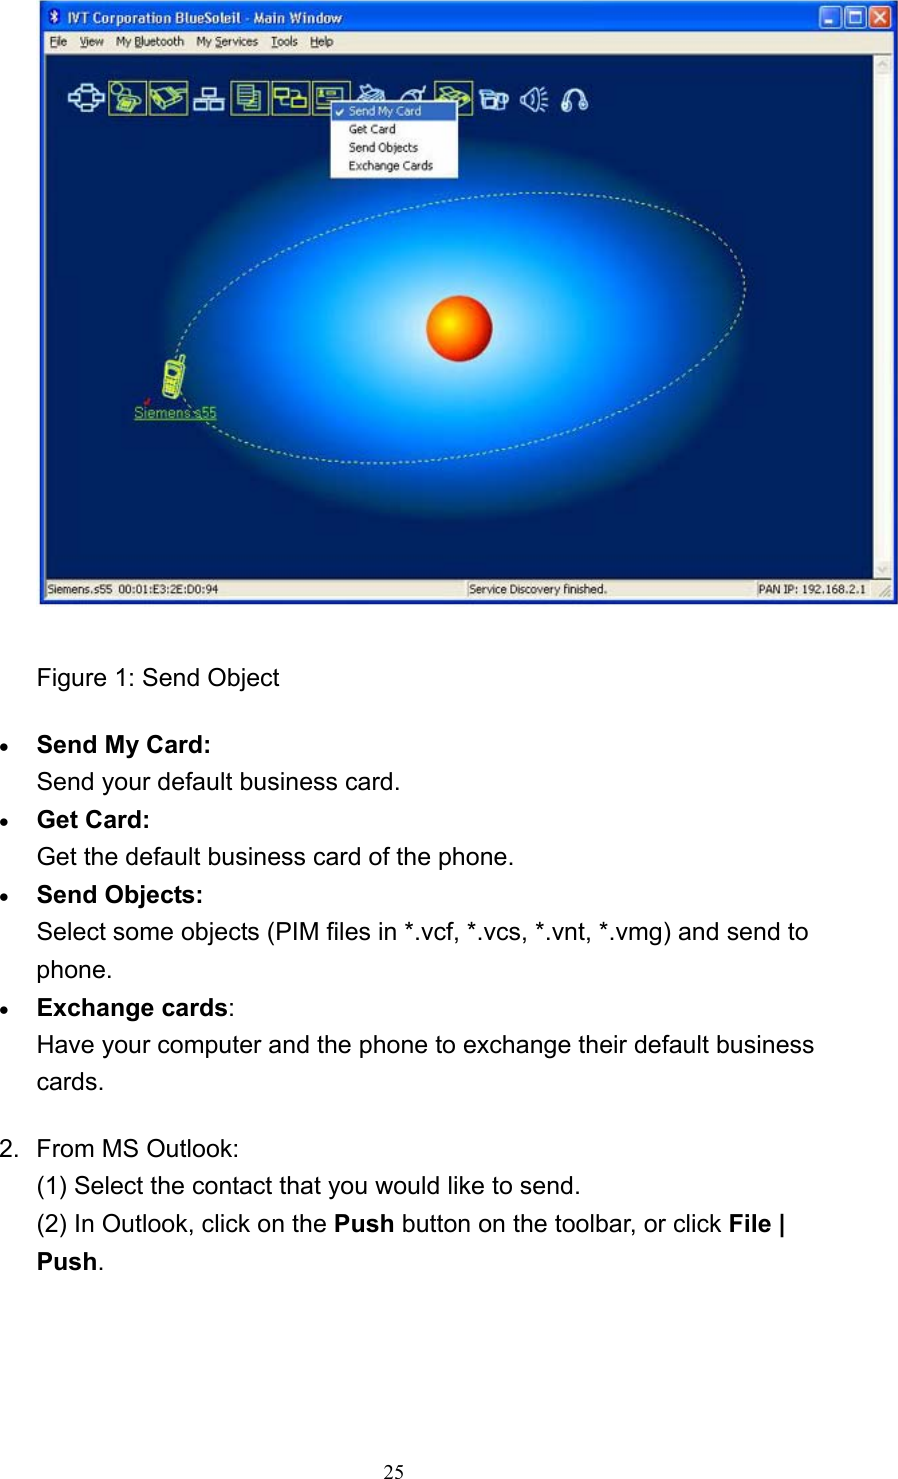   25 Figure 1: Send Object   • Send My Card: Send your default business card.   • Get Card: Get the default business card of the phone.   • Send Objects: Select some objects (PIM files in *.vcf, *.vcs, *.vnt, *.vmg) and send to phone.  • Exchange cards: Have your computer and the phone to exchange their default business cards.  2. From MS Outlook: (1) Select the contact that you would like to send. (2) In Outlook, click on the Push button on the toolbar, or click File | Push. 